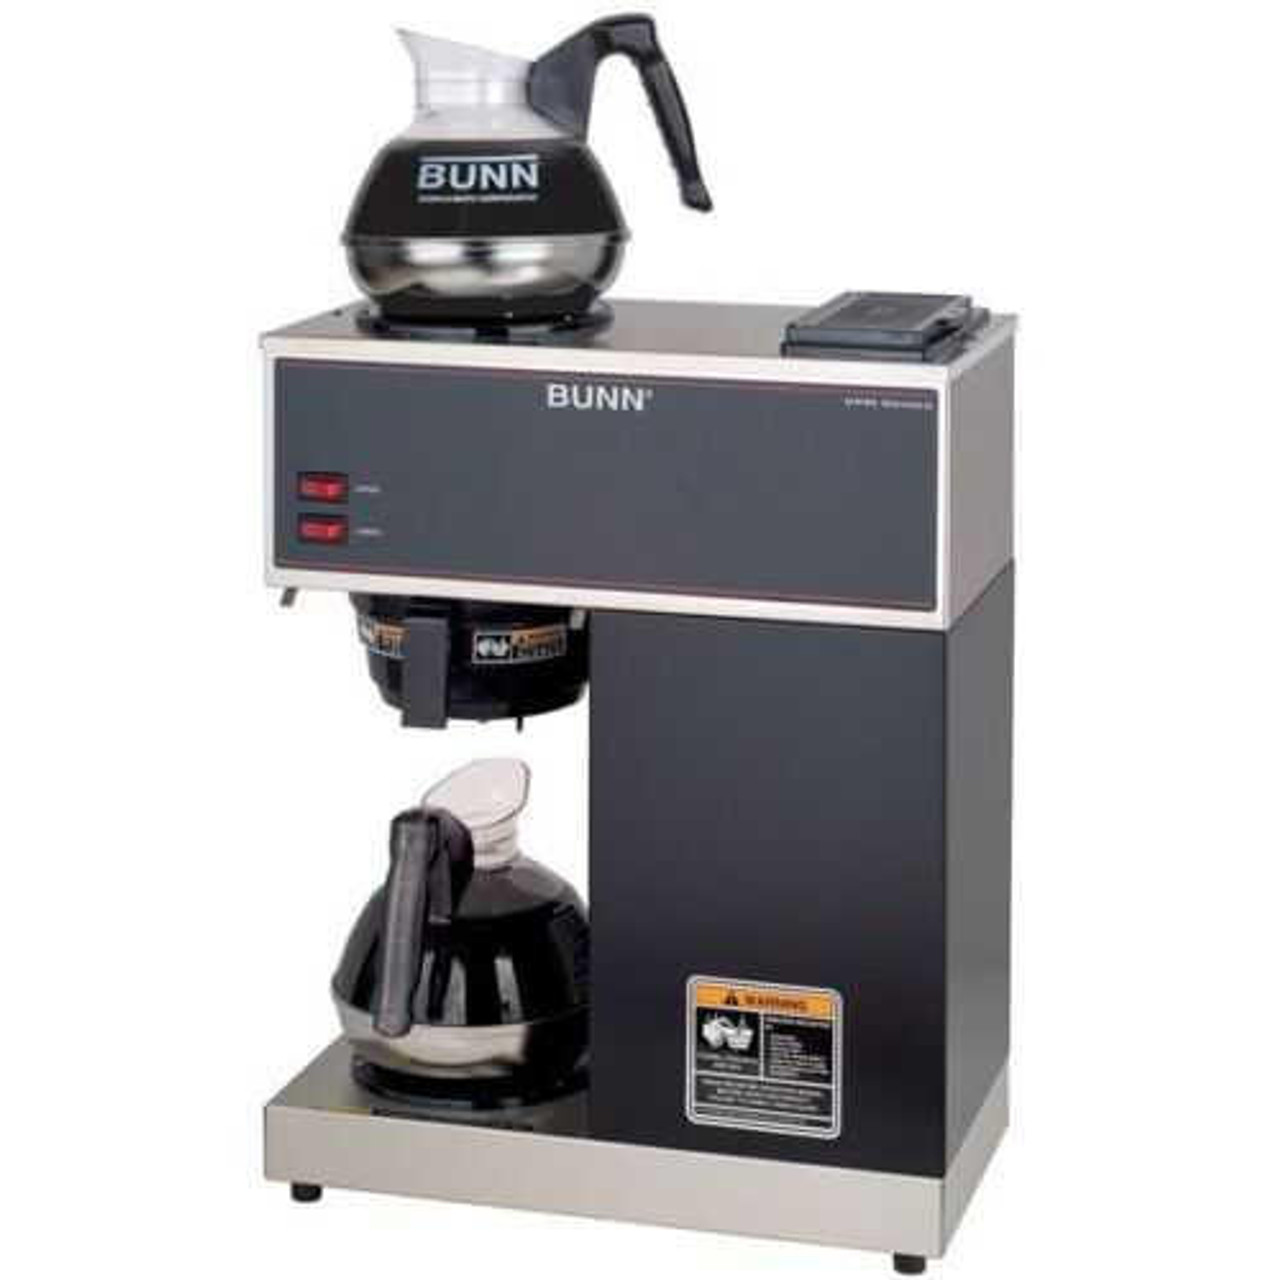  Bunn 33200.0002 VPR Black 12 Cup Pourover Coffee Brewer with 2 Glass Decanters OPEN BOX 